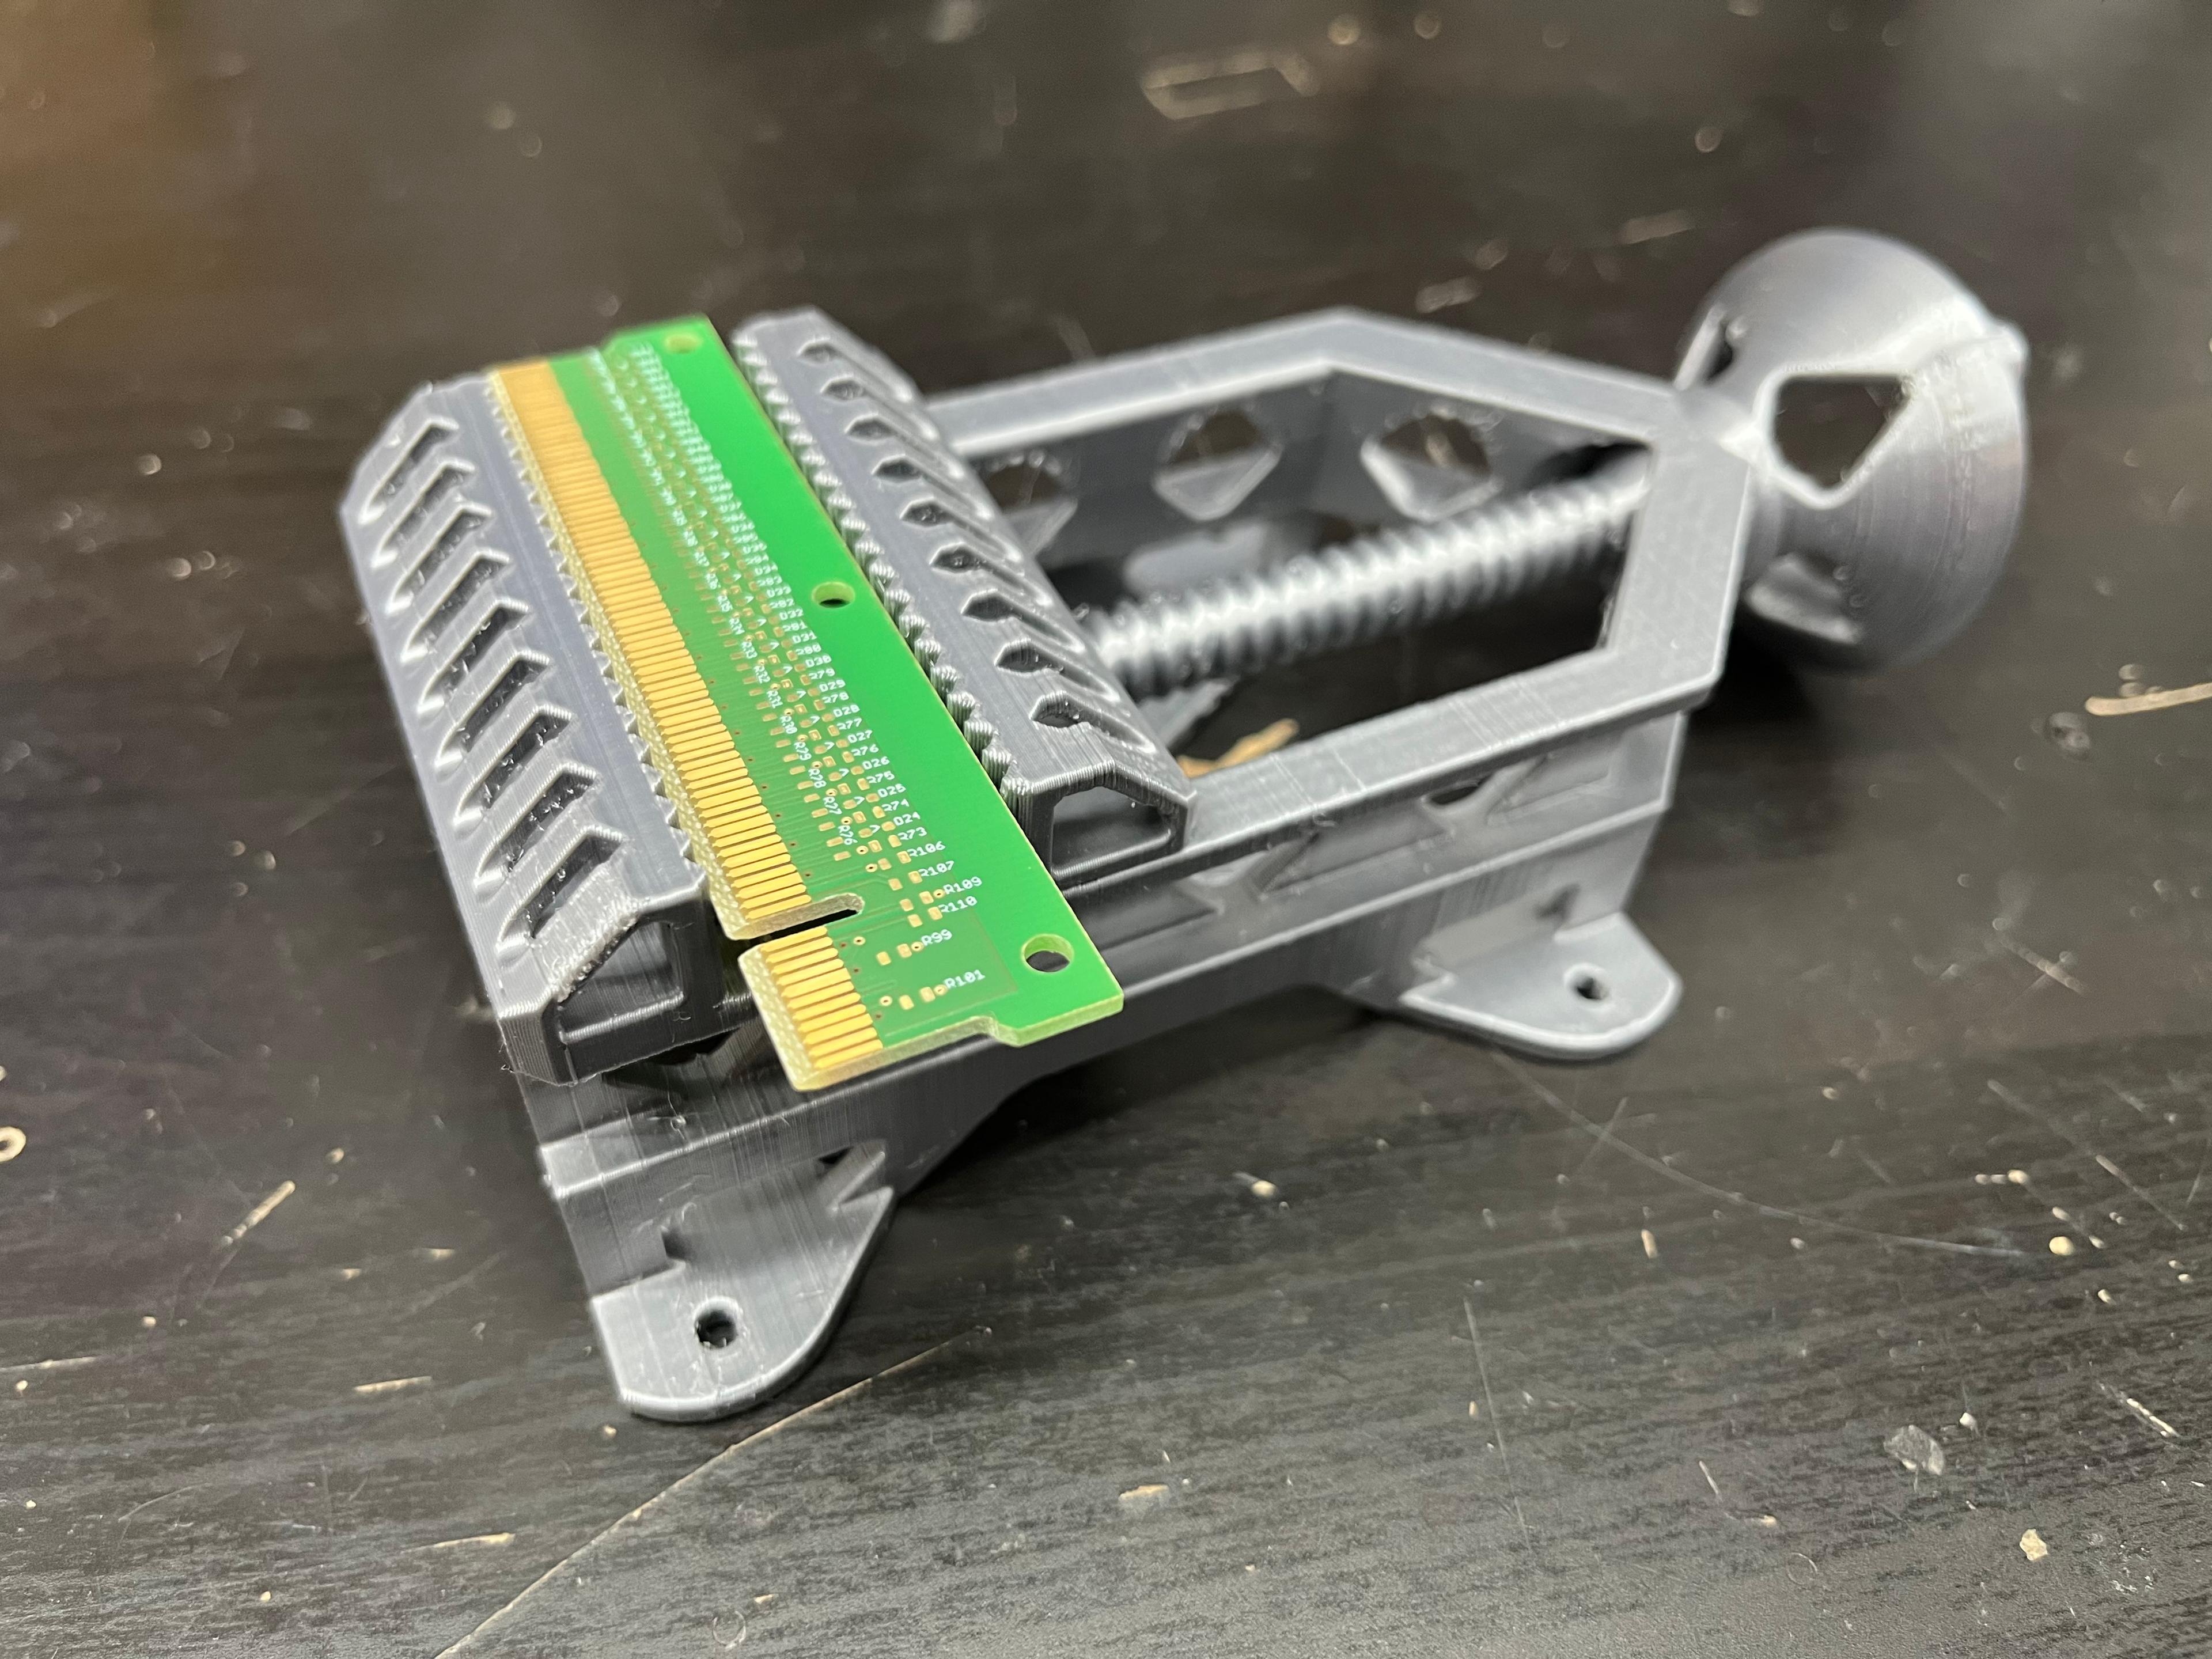 Mini Print-in-Place Vise - The small handle broke off, but that's probably due to my cheap filament. Everything else works great after breaking it free with a utility knife. Cool model. - 3d model